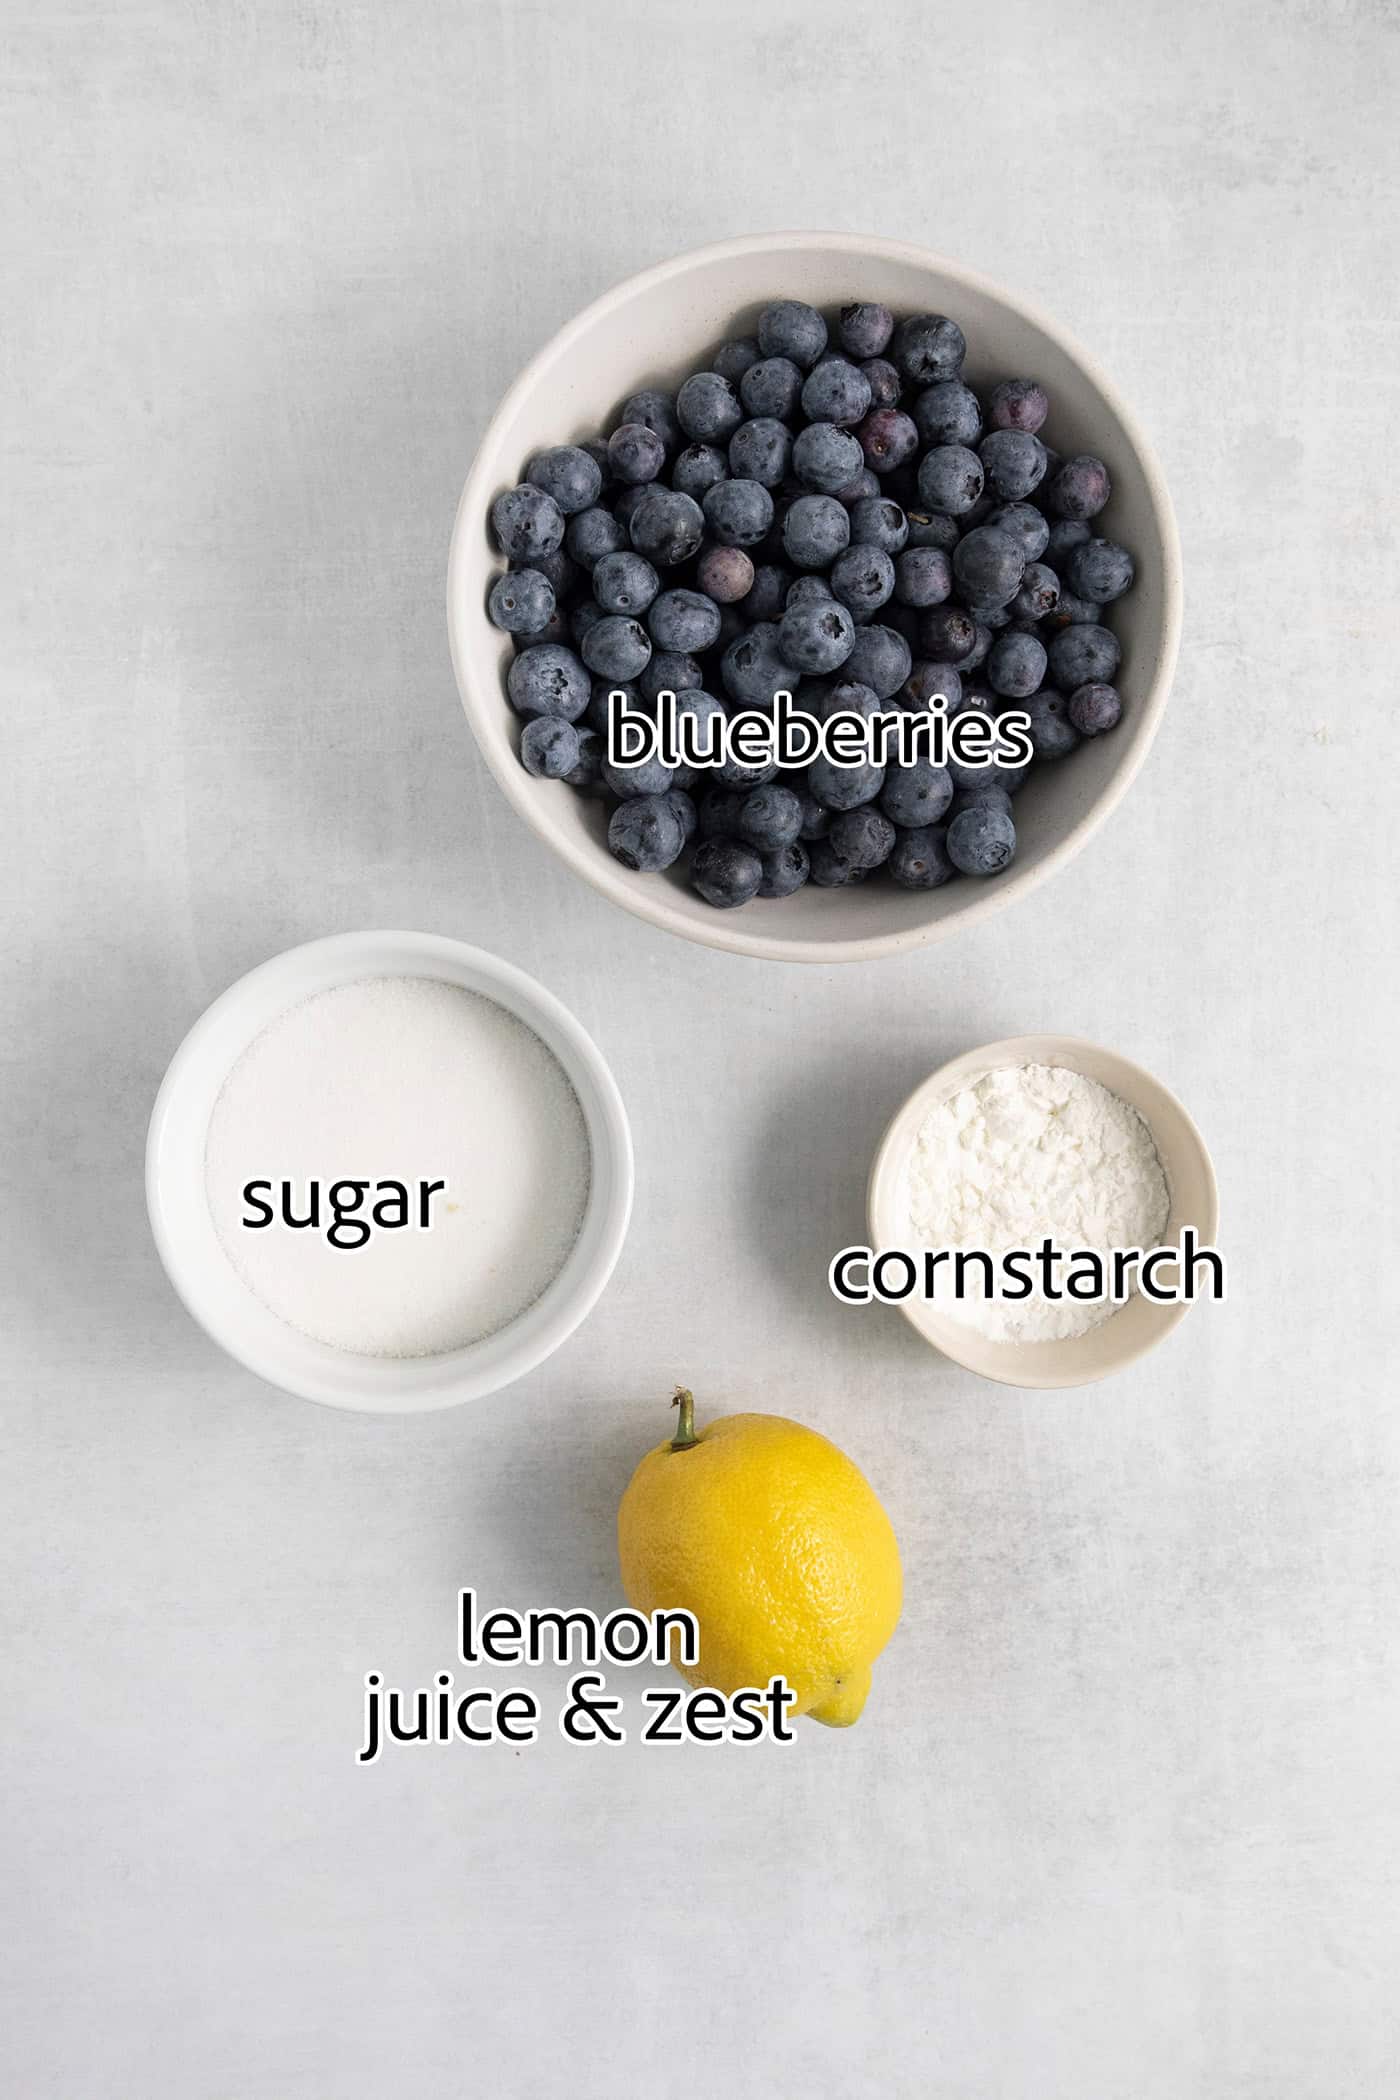 The ingredients for the blueberry layer is shown labelled: blueberries, lemon, sugar, cornstarch.